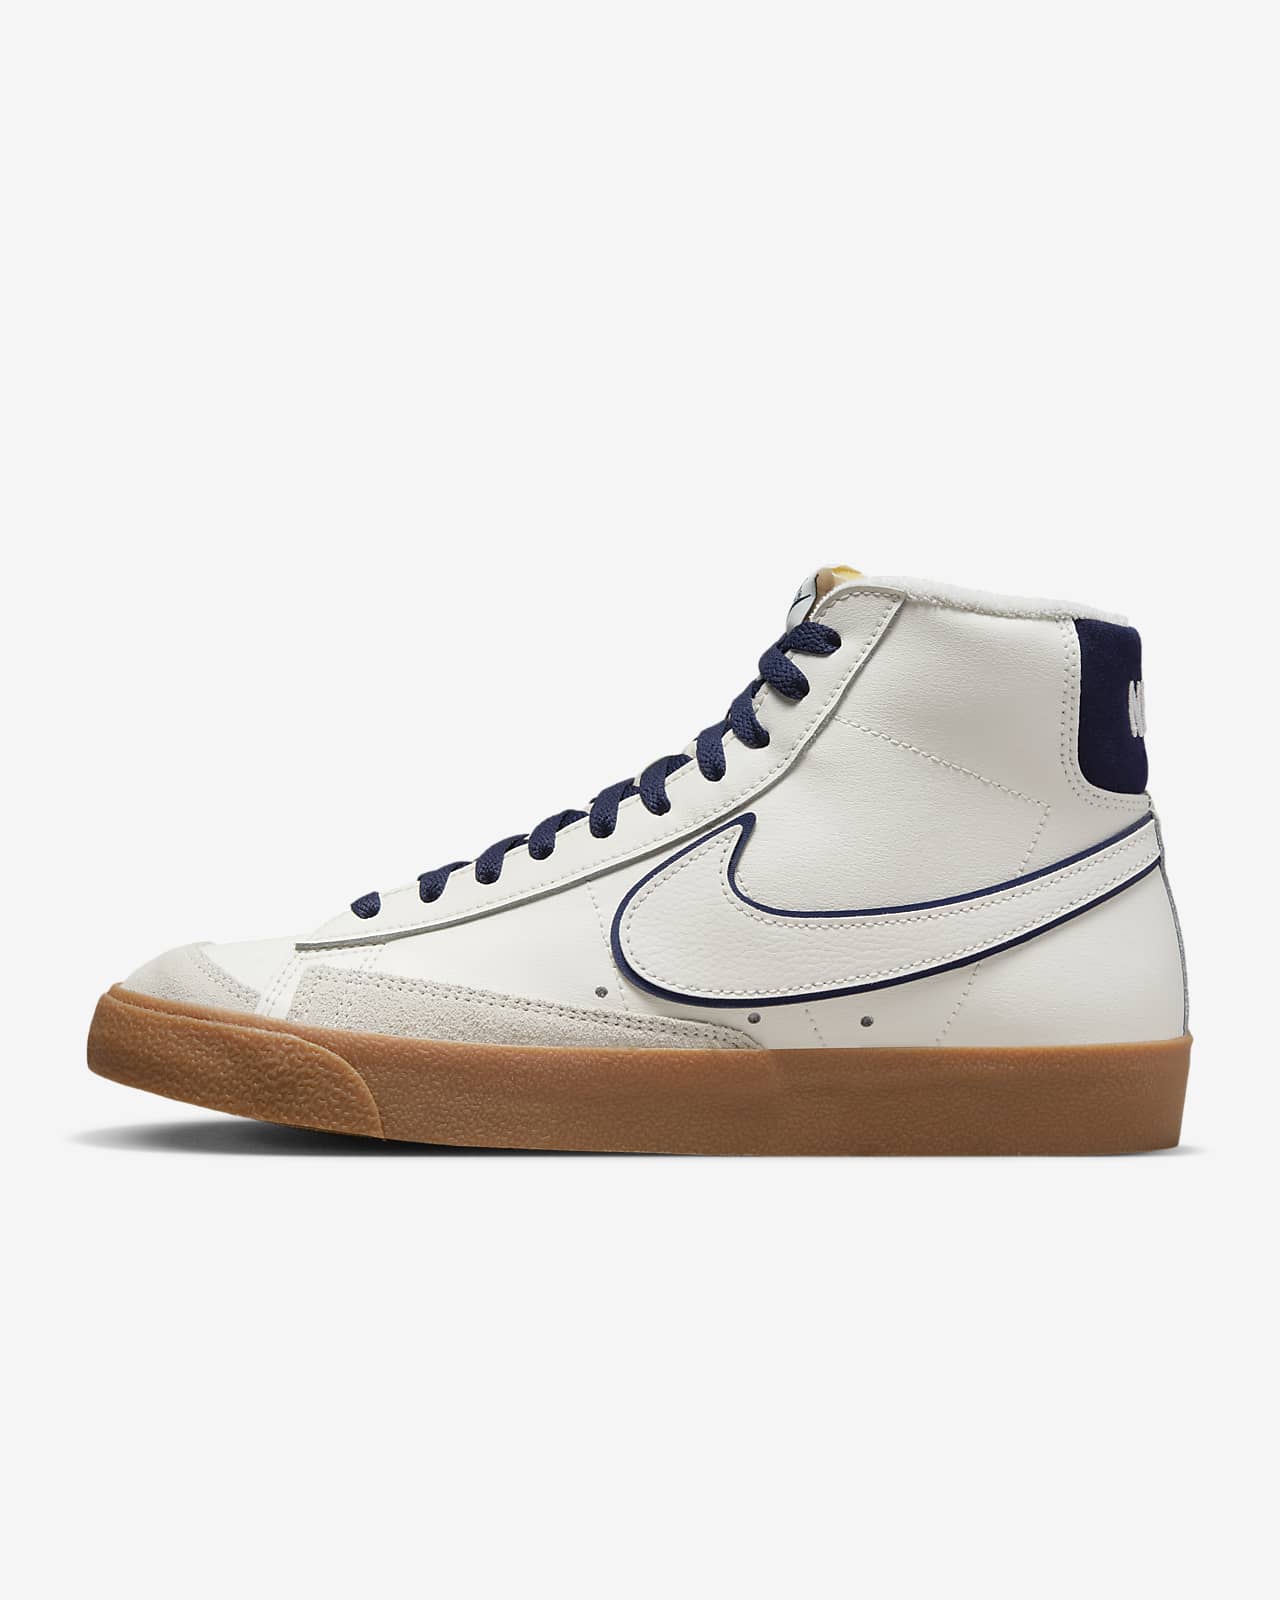 Forbid To tell the truth Coincidence Nike Blazer Mid '77 Premium Men's Shoes. Nike.com